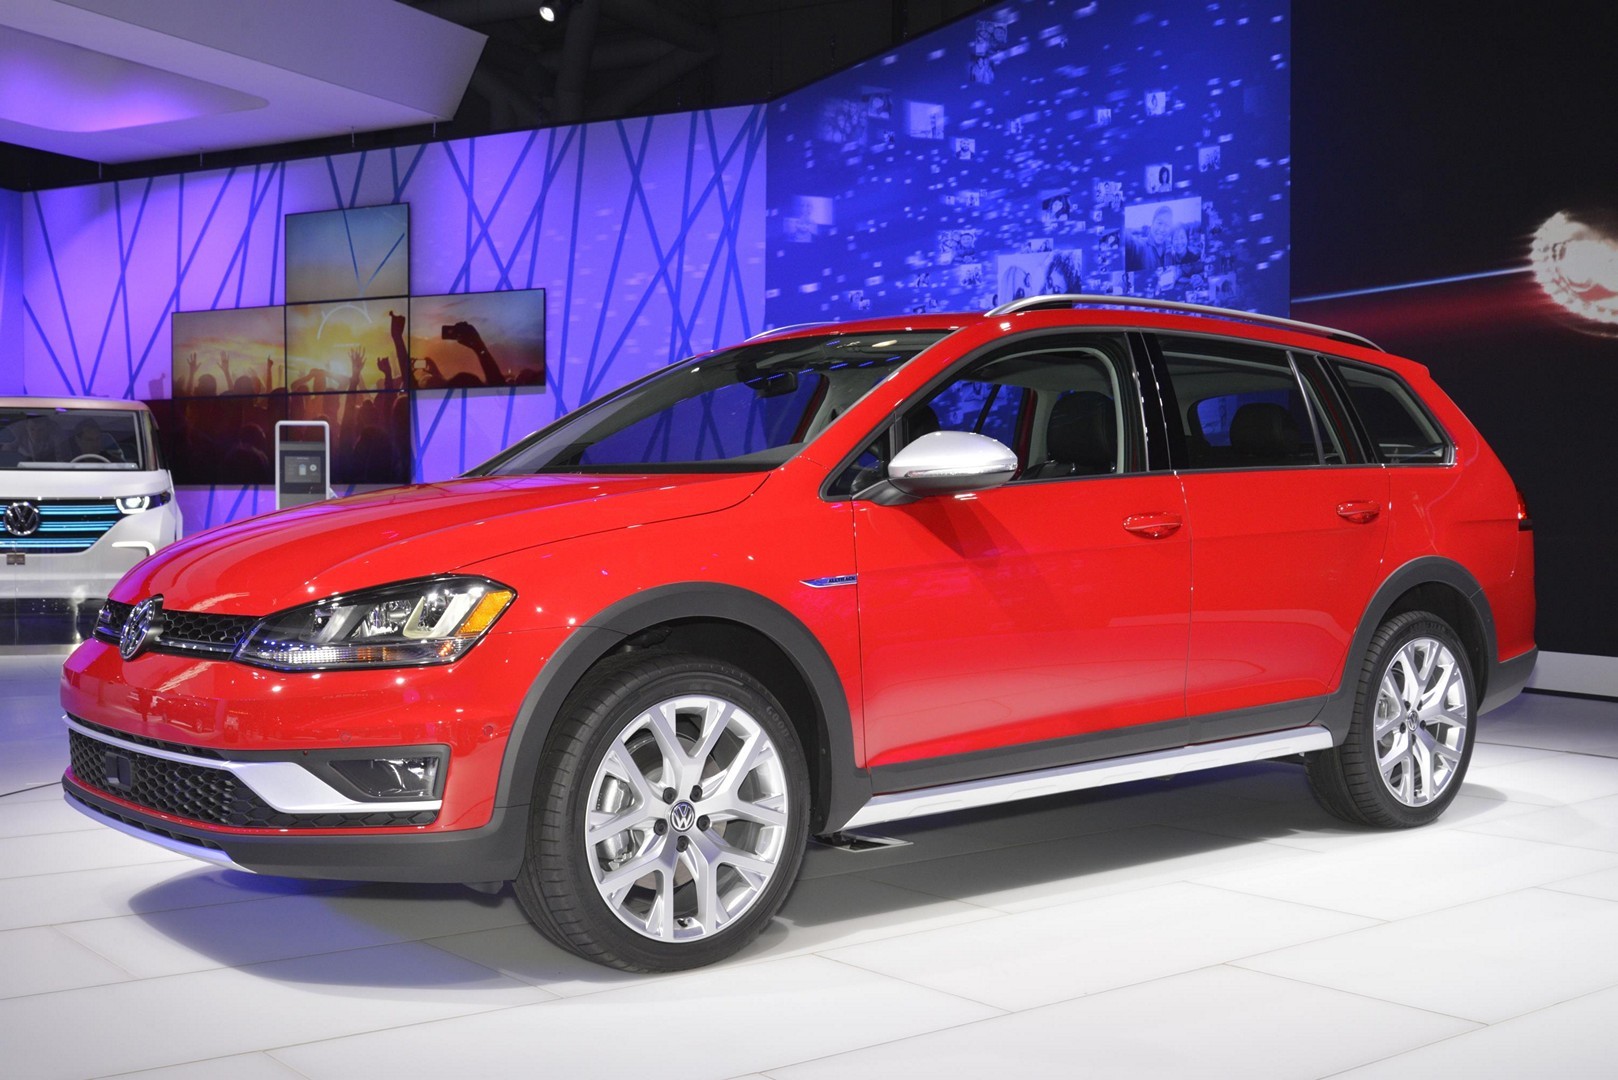 2017 VW Golf Alltrack Has Dual Exhaust and Red Paint like a GTI in New